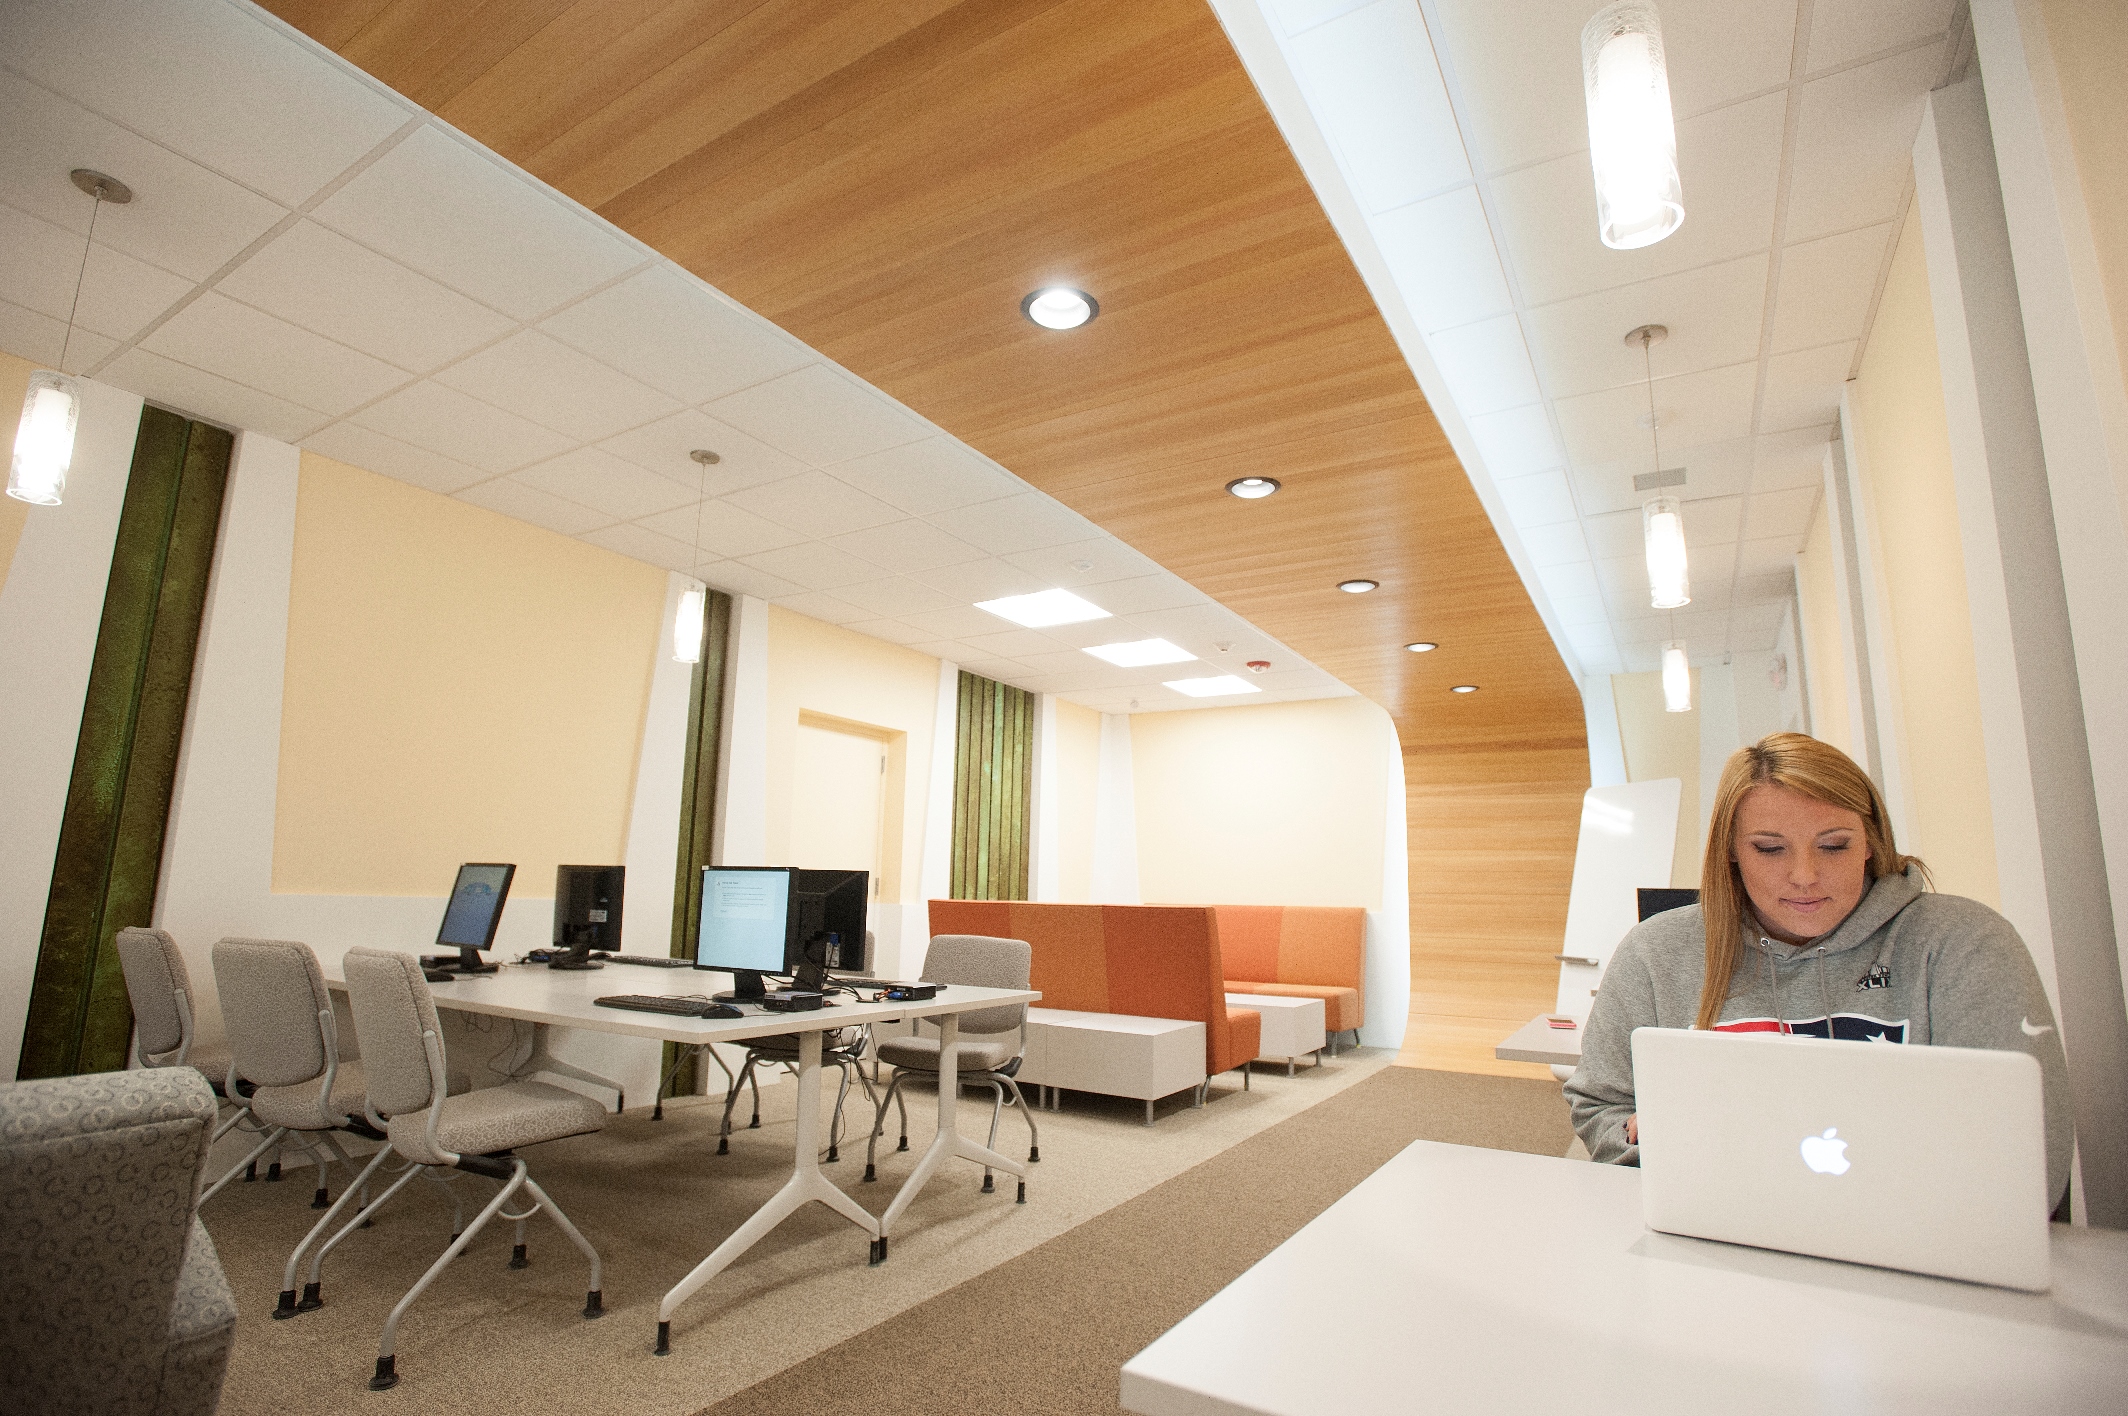 The new Wadleigh Academic Center at Husson University has a comfortable adaptable design that encourages student collaboration and learning.